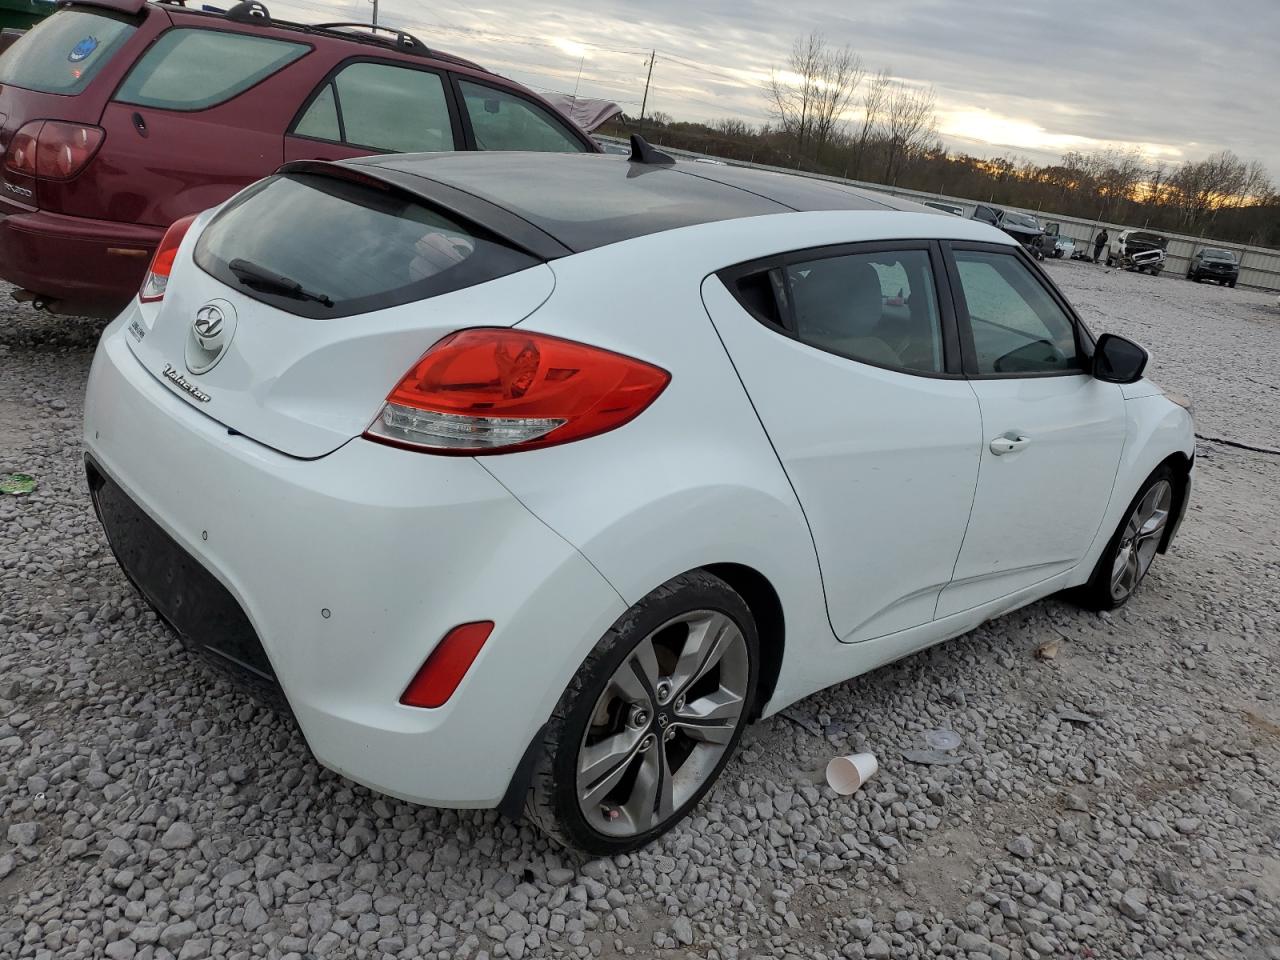 KMHTC6AD4CU****** Salvage and Repairable 2012 Hyundai Veloster in AL - Hueytown